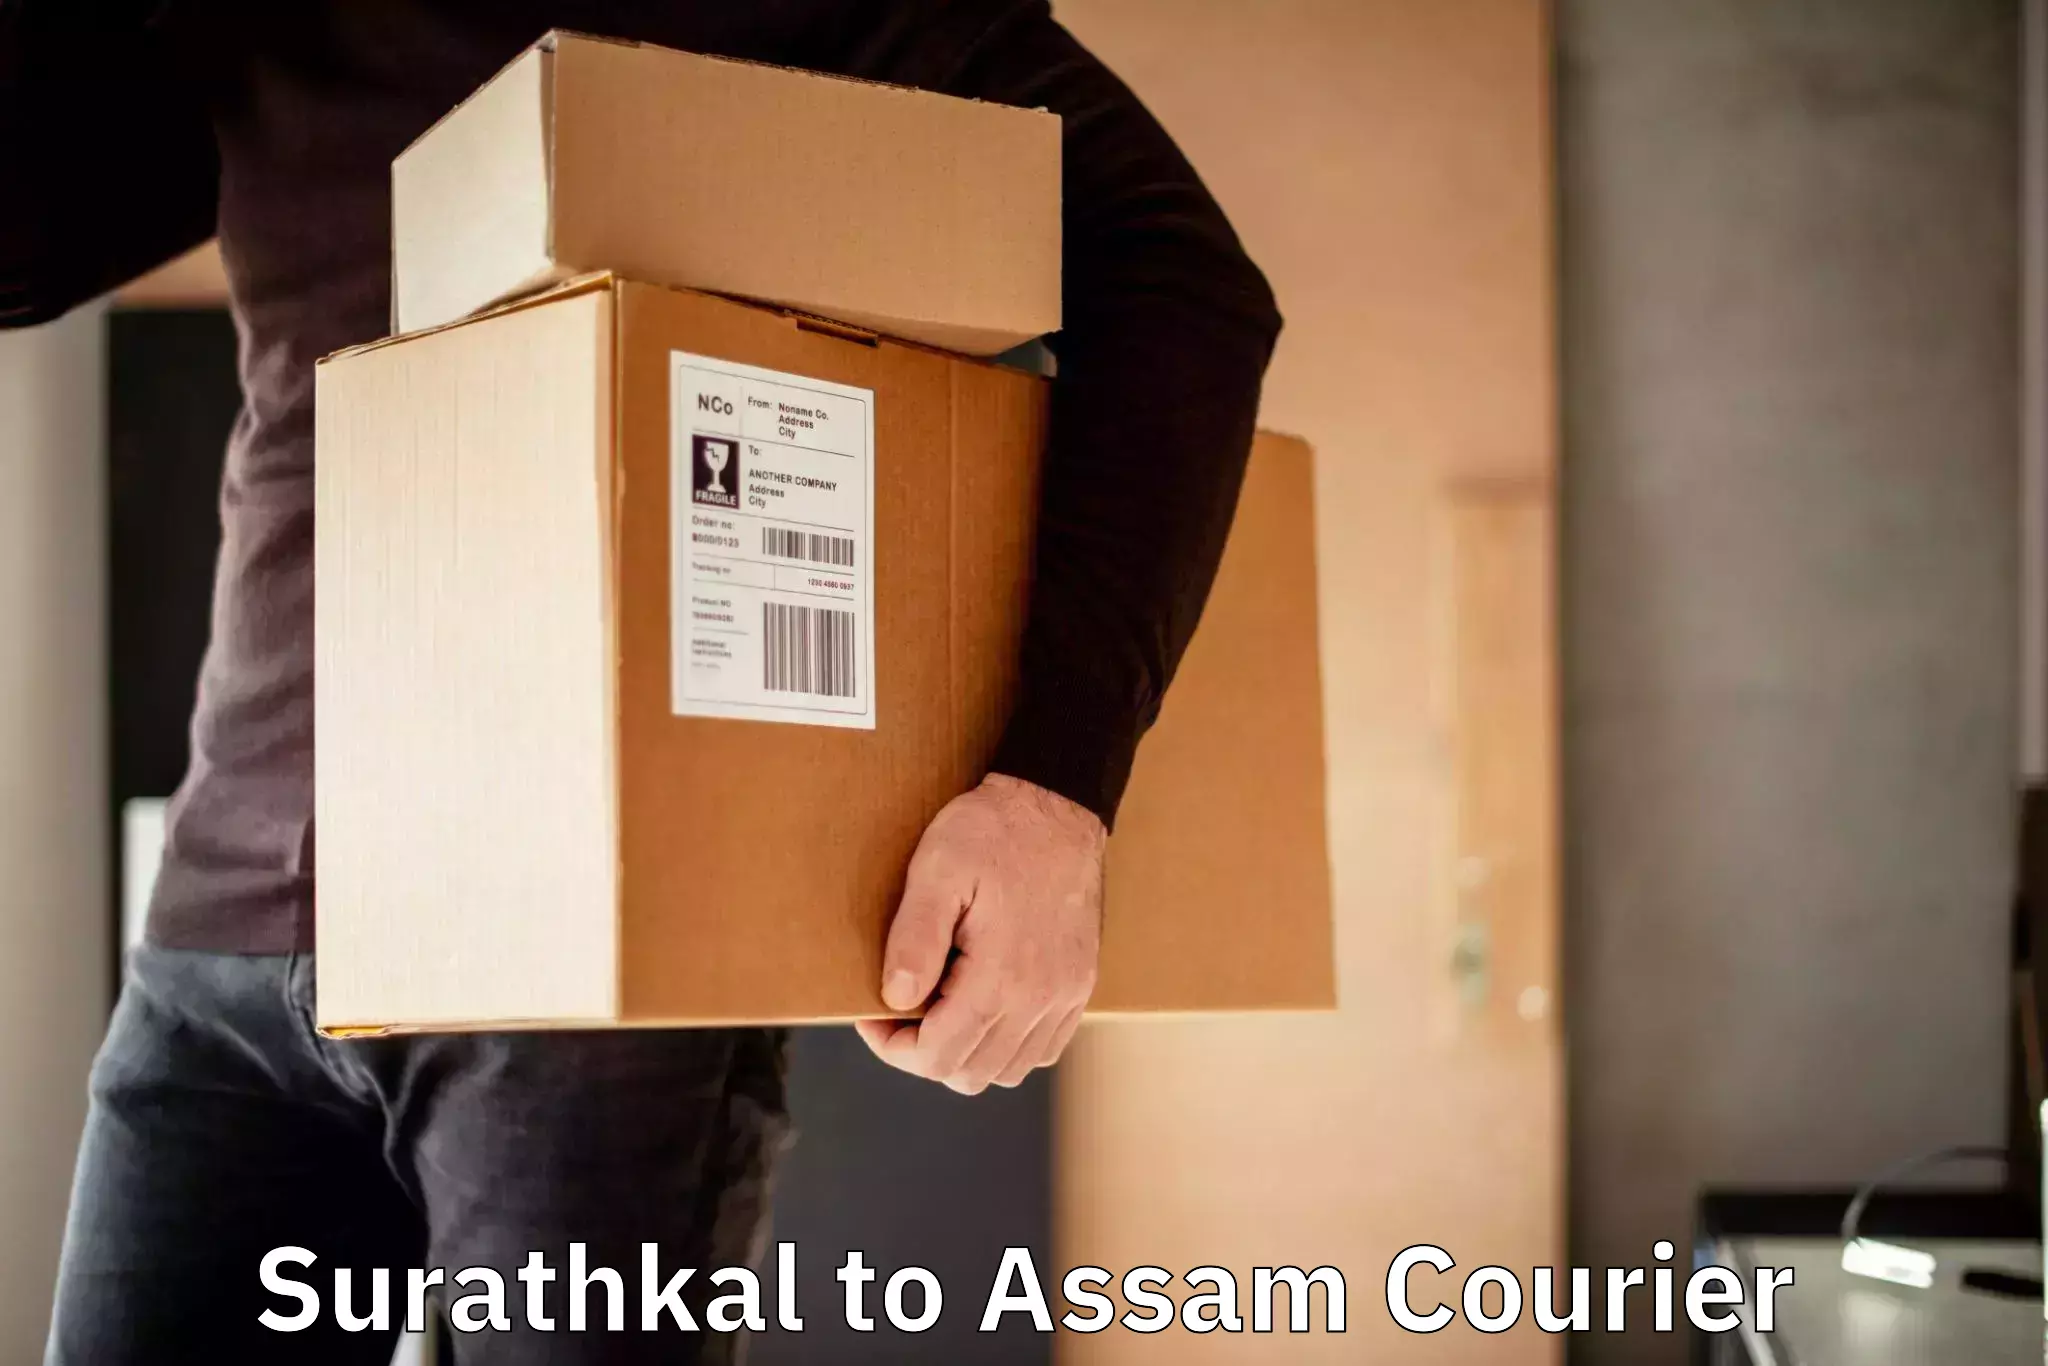 Sustainable courier practices Surathkal to Udharbond